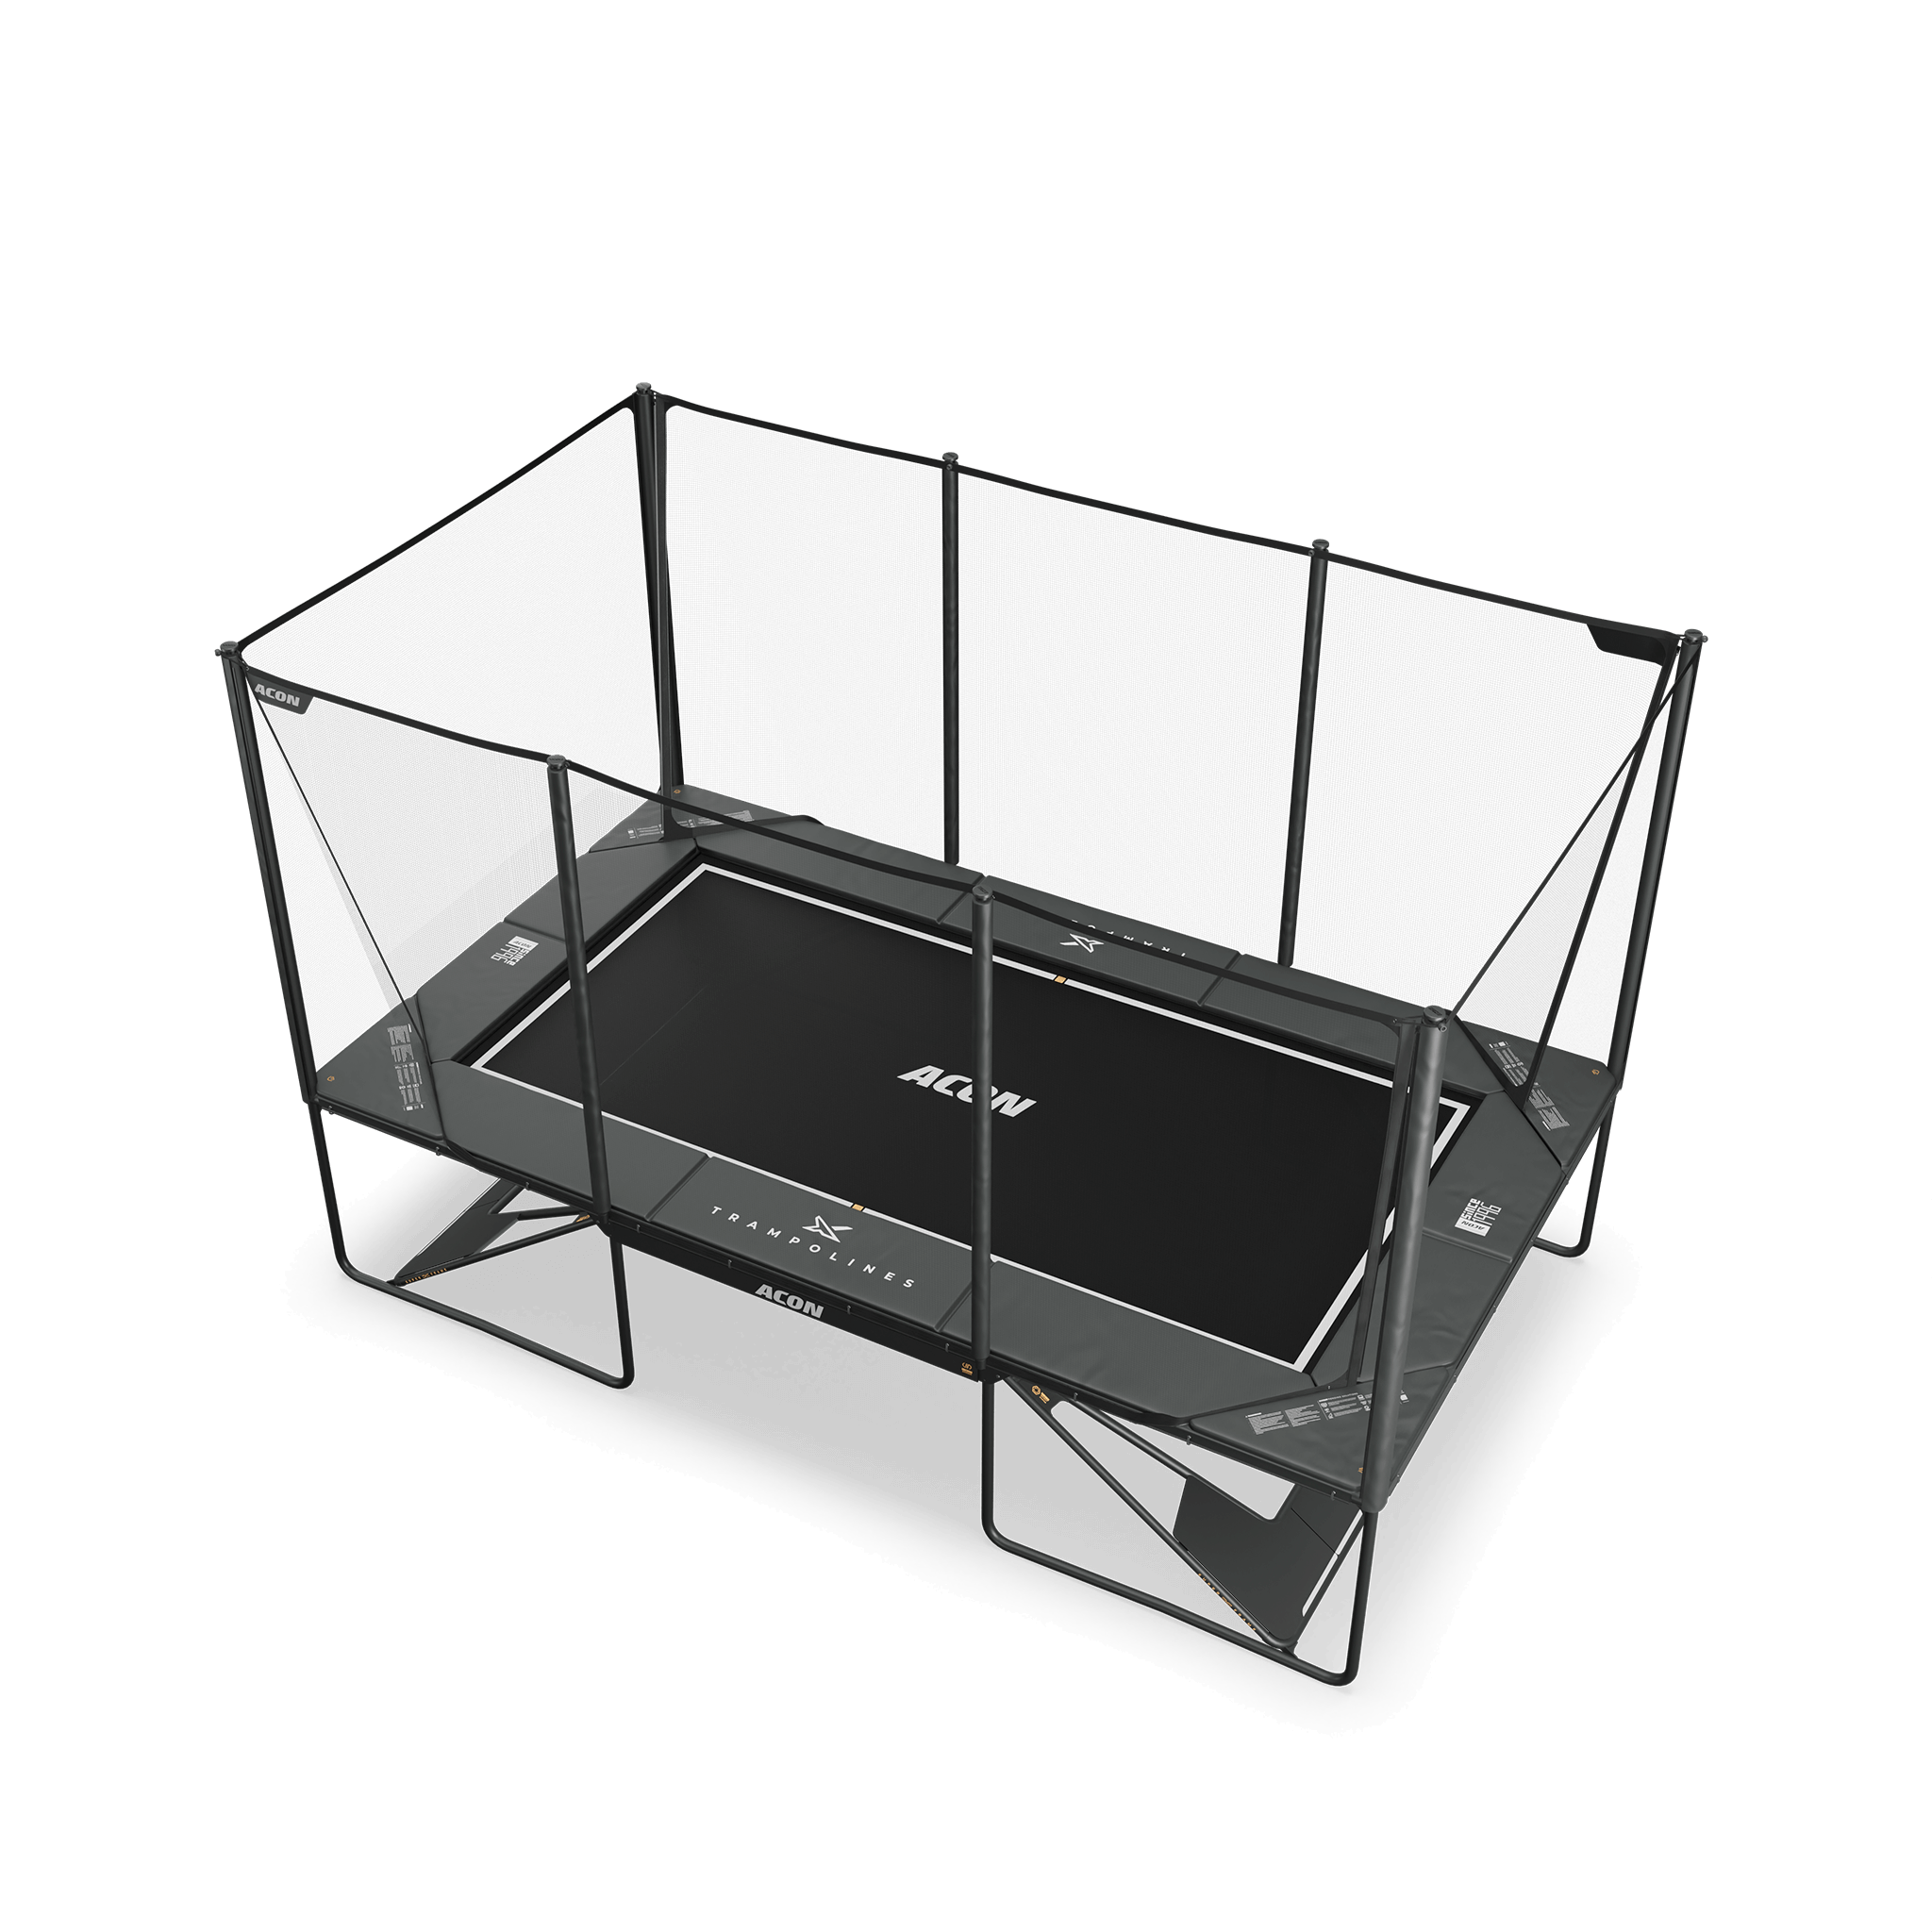 ACON X 17ft Rectangular Trampoline with Net and Ladder, Black.